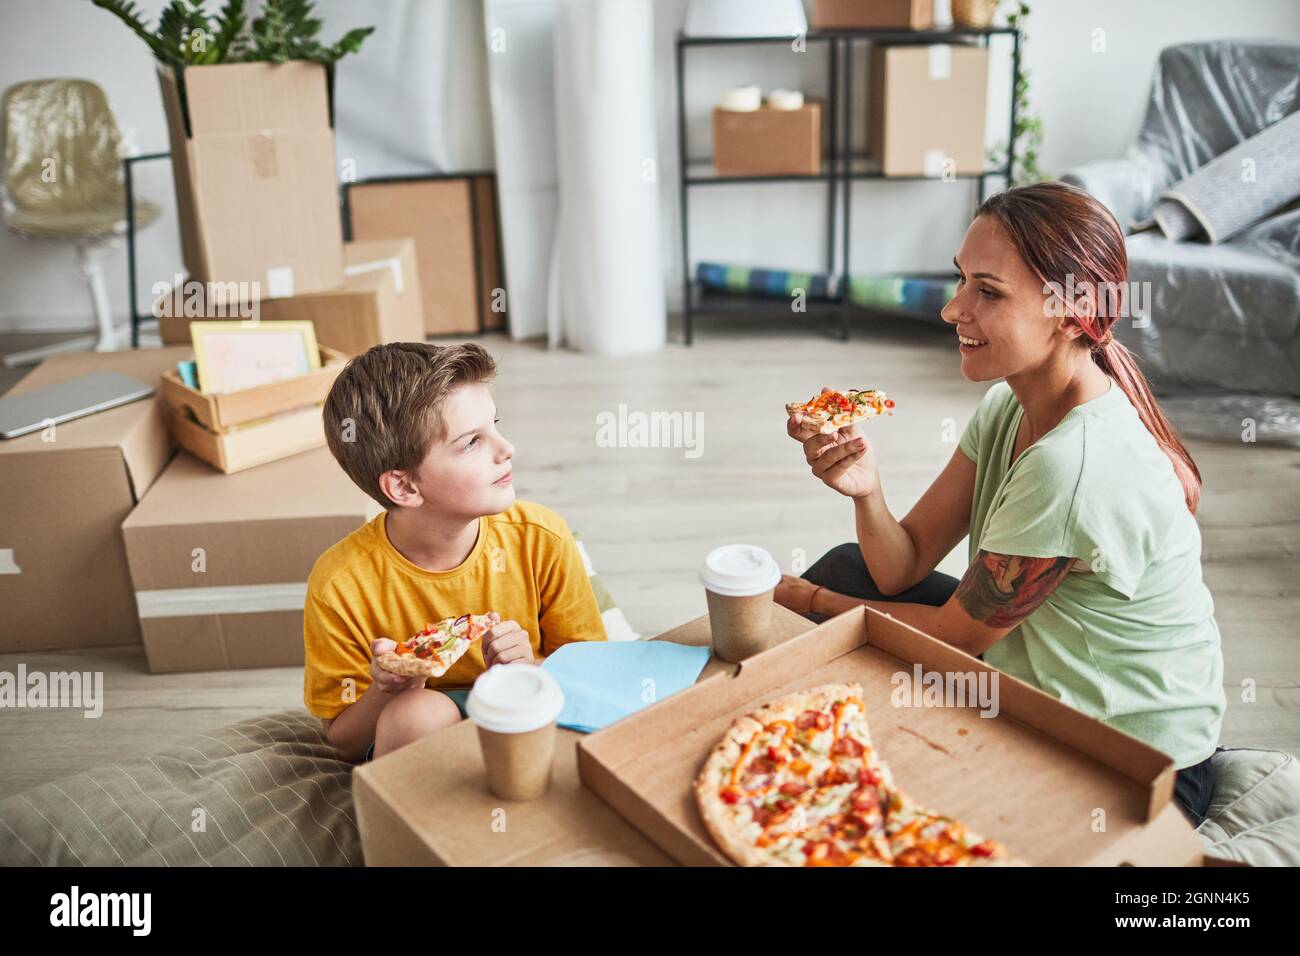 Portrait of young mother and son eating pizza from cardboard box while celebrating moving in to new house, copy space Stock Photo